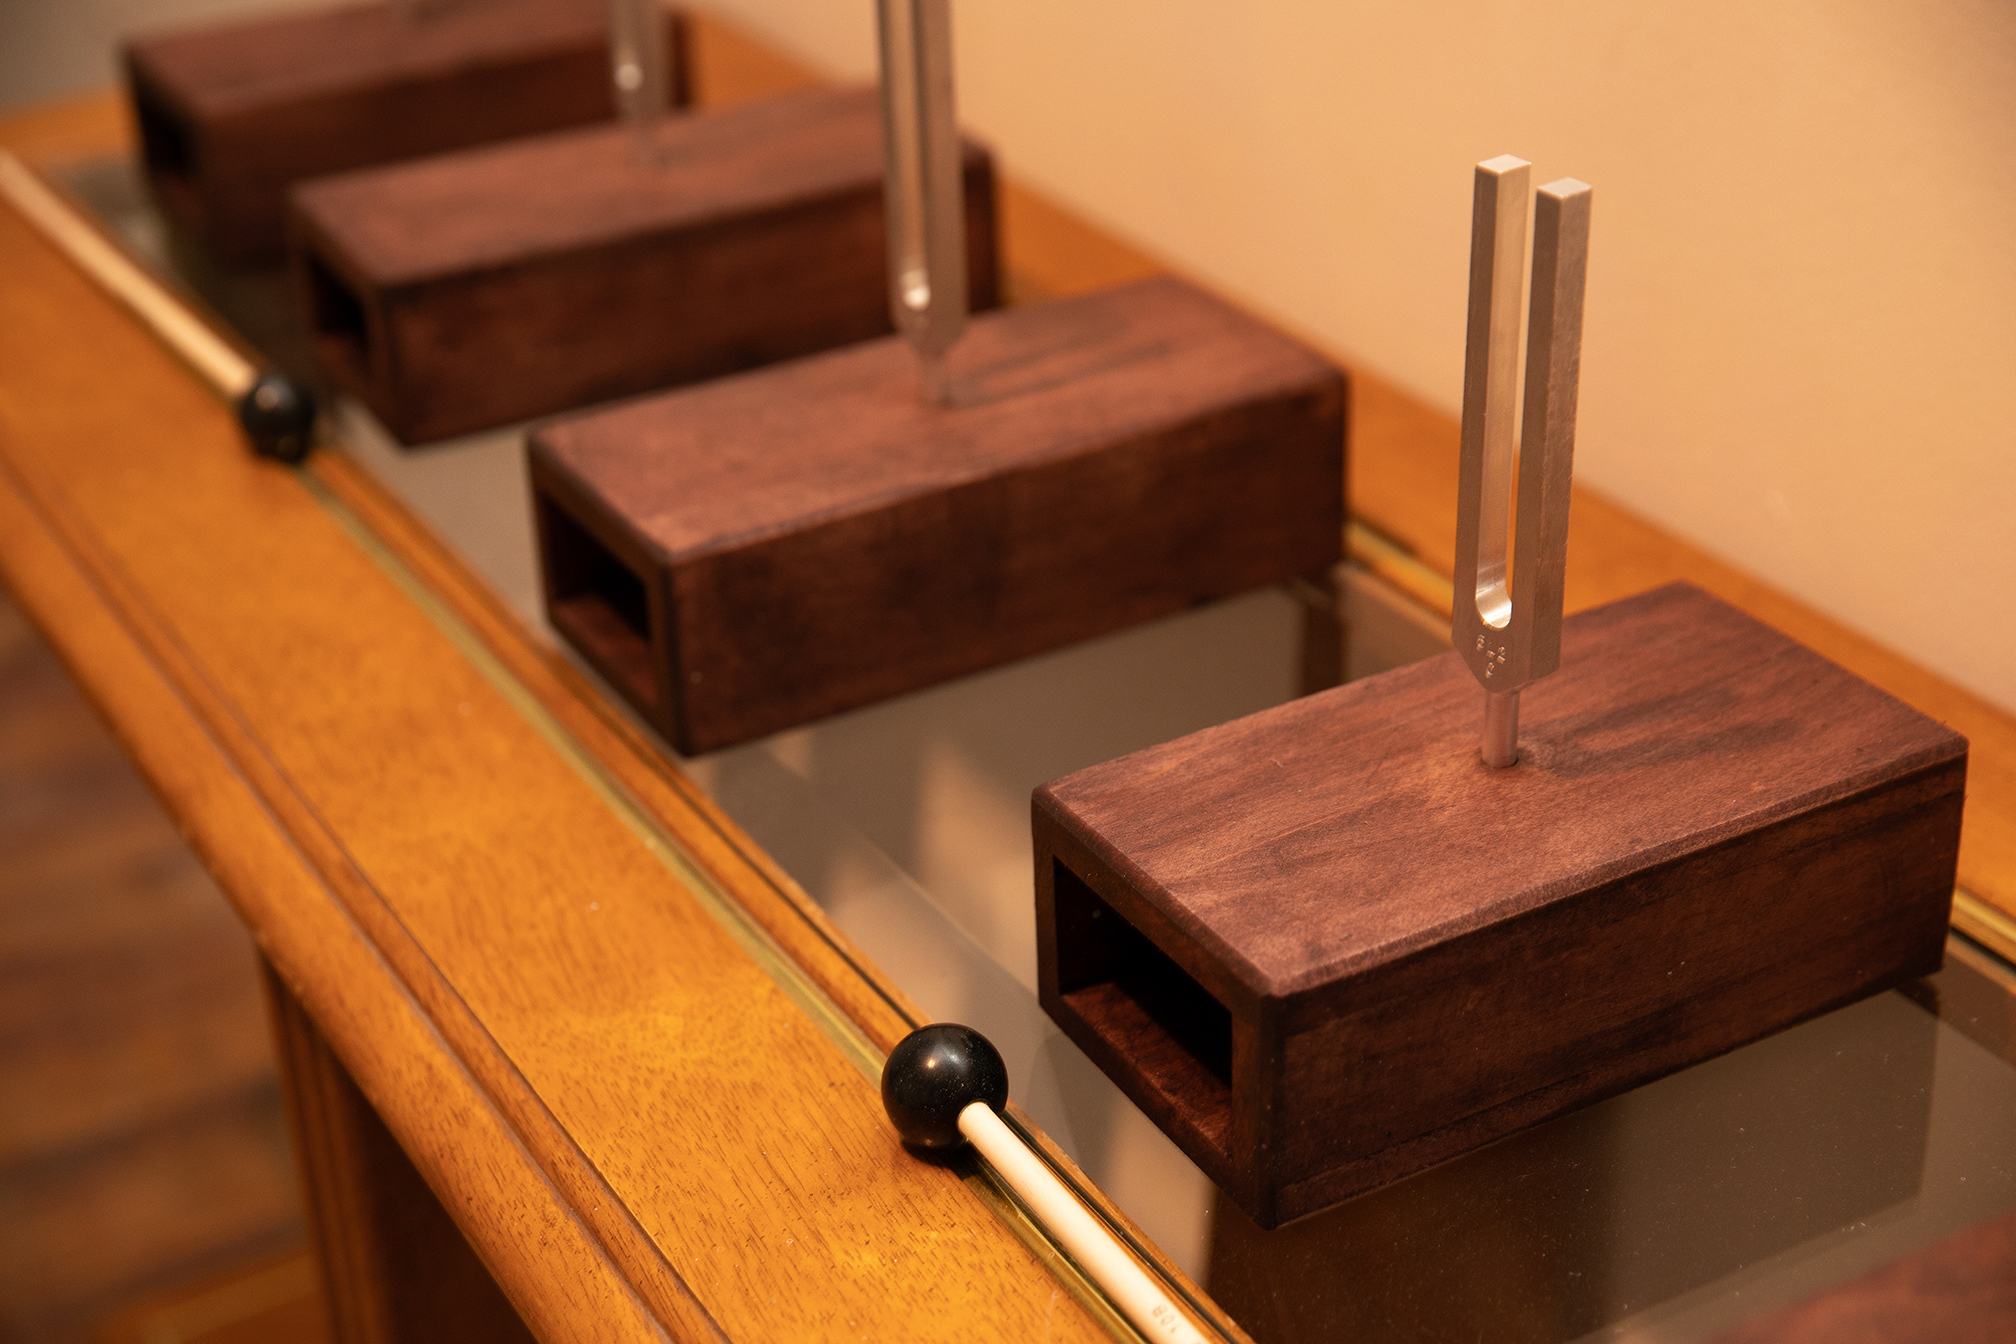 Extreme detail of a small wooden table with five tuning forks set in resanator boxes and two mallets set up on it against a white wall